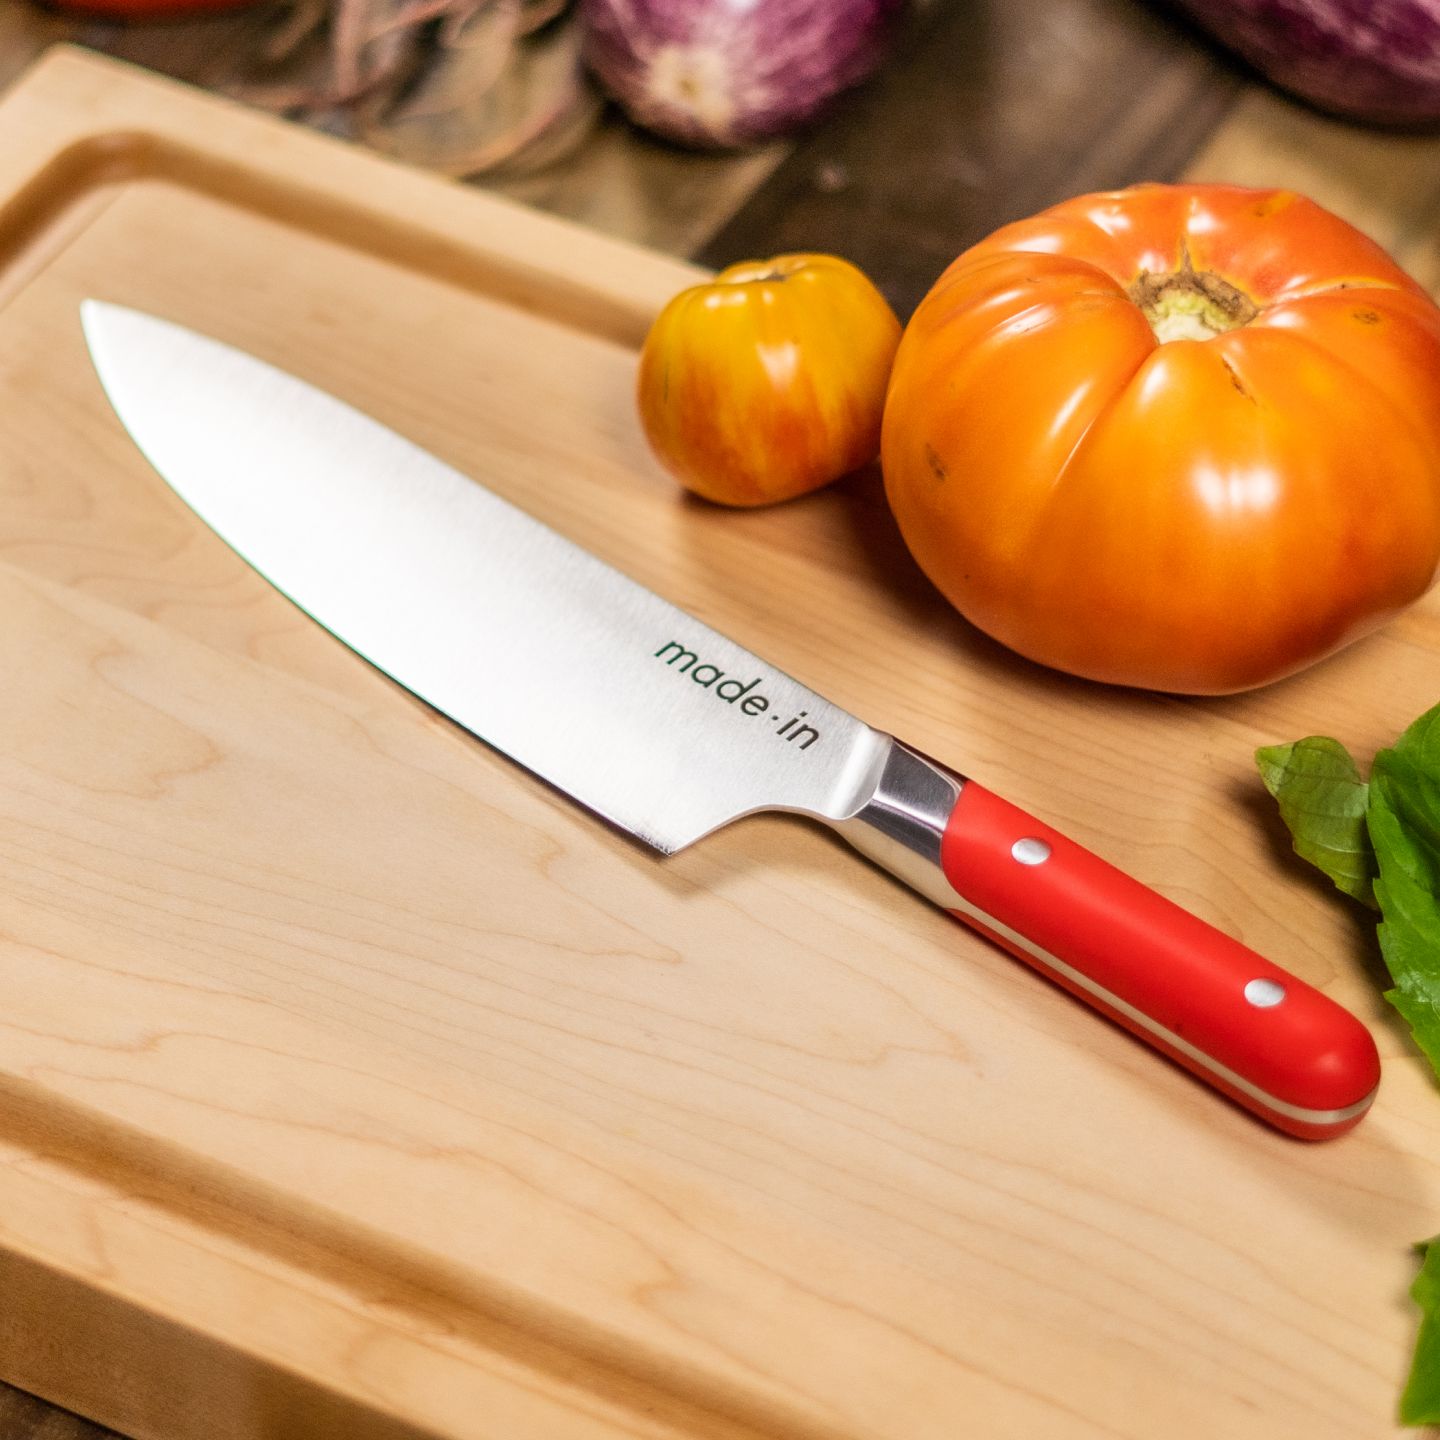 Trusted Butcher Professional 8-Inch Chef Knife Review